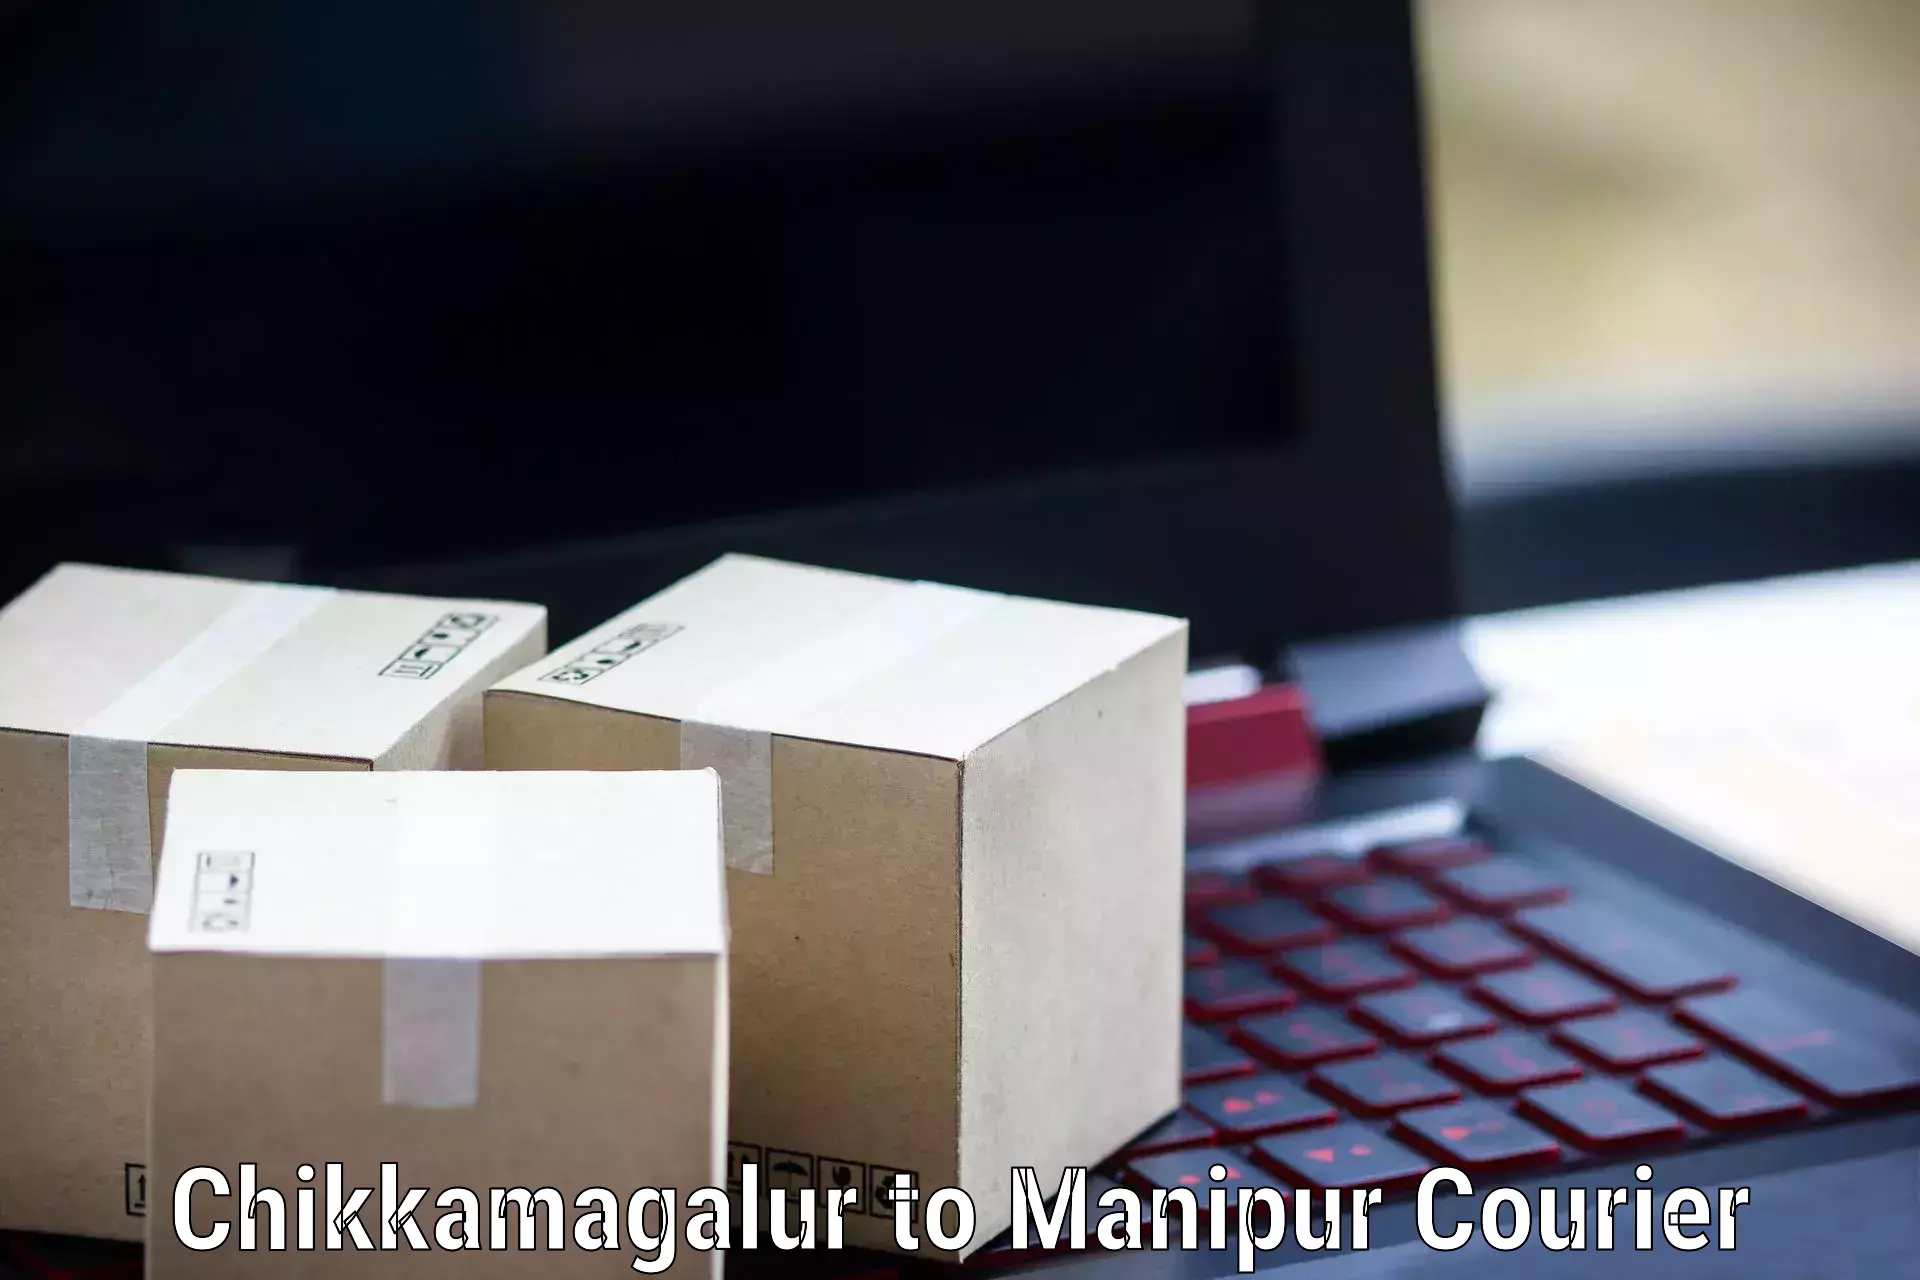 Courier service innovation Chikkamagalur to Imphal